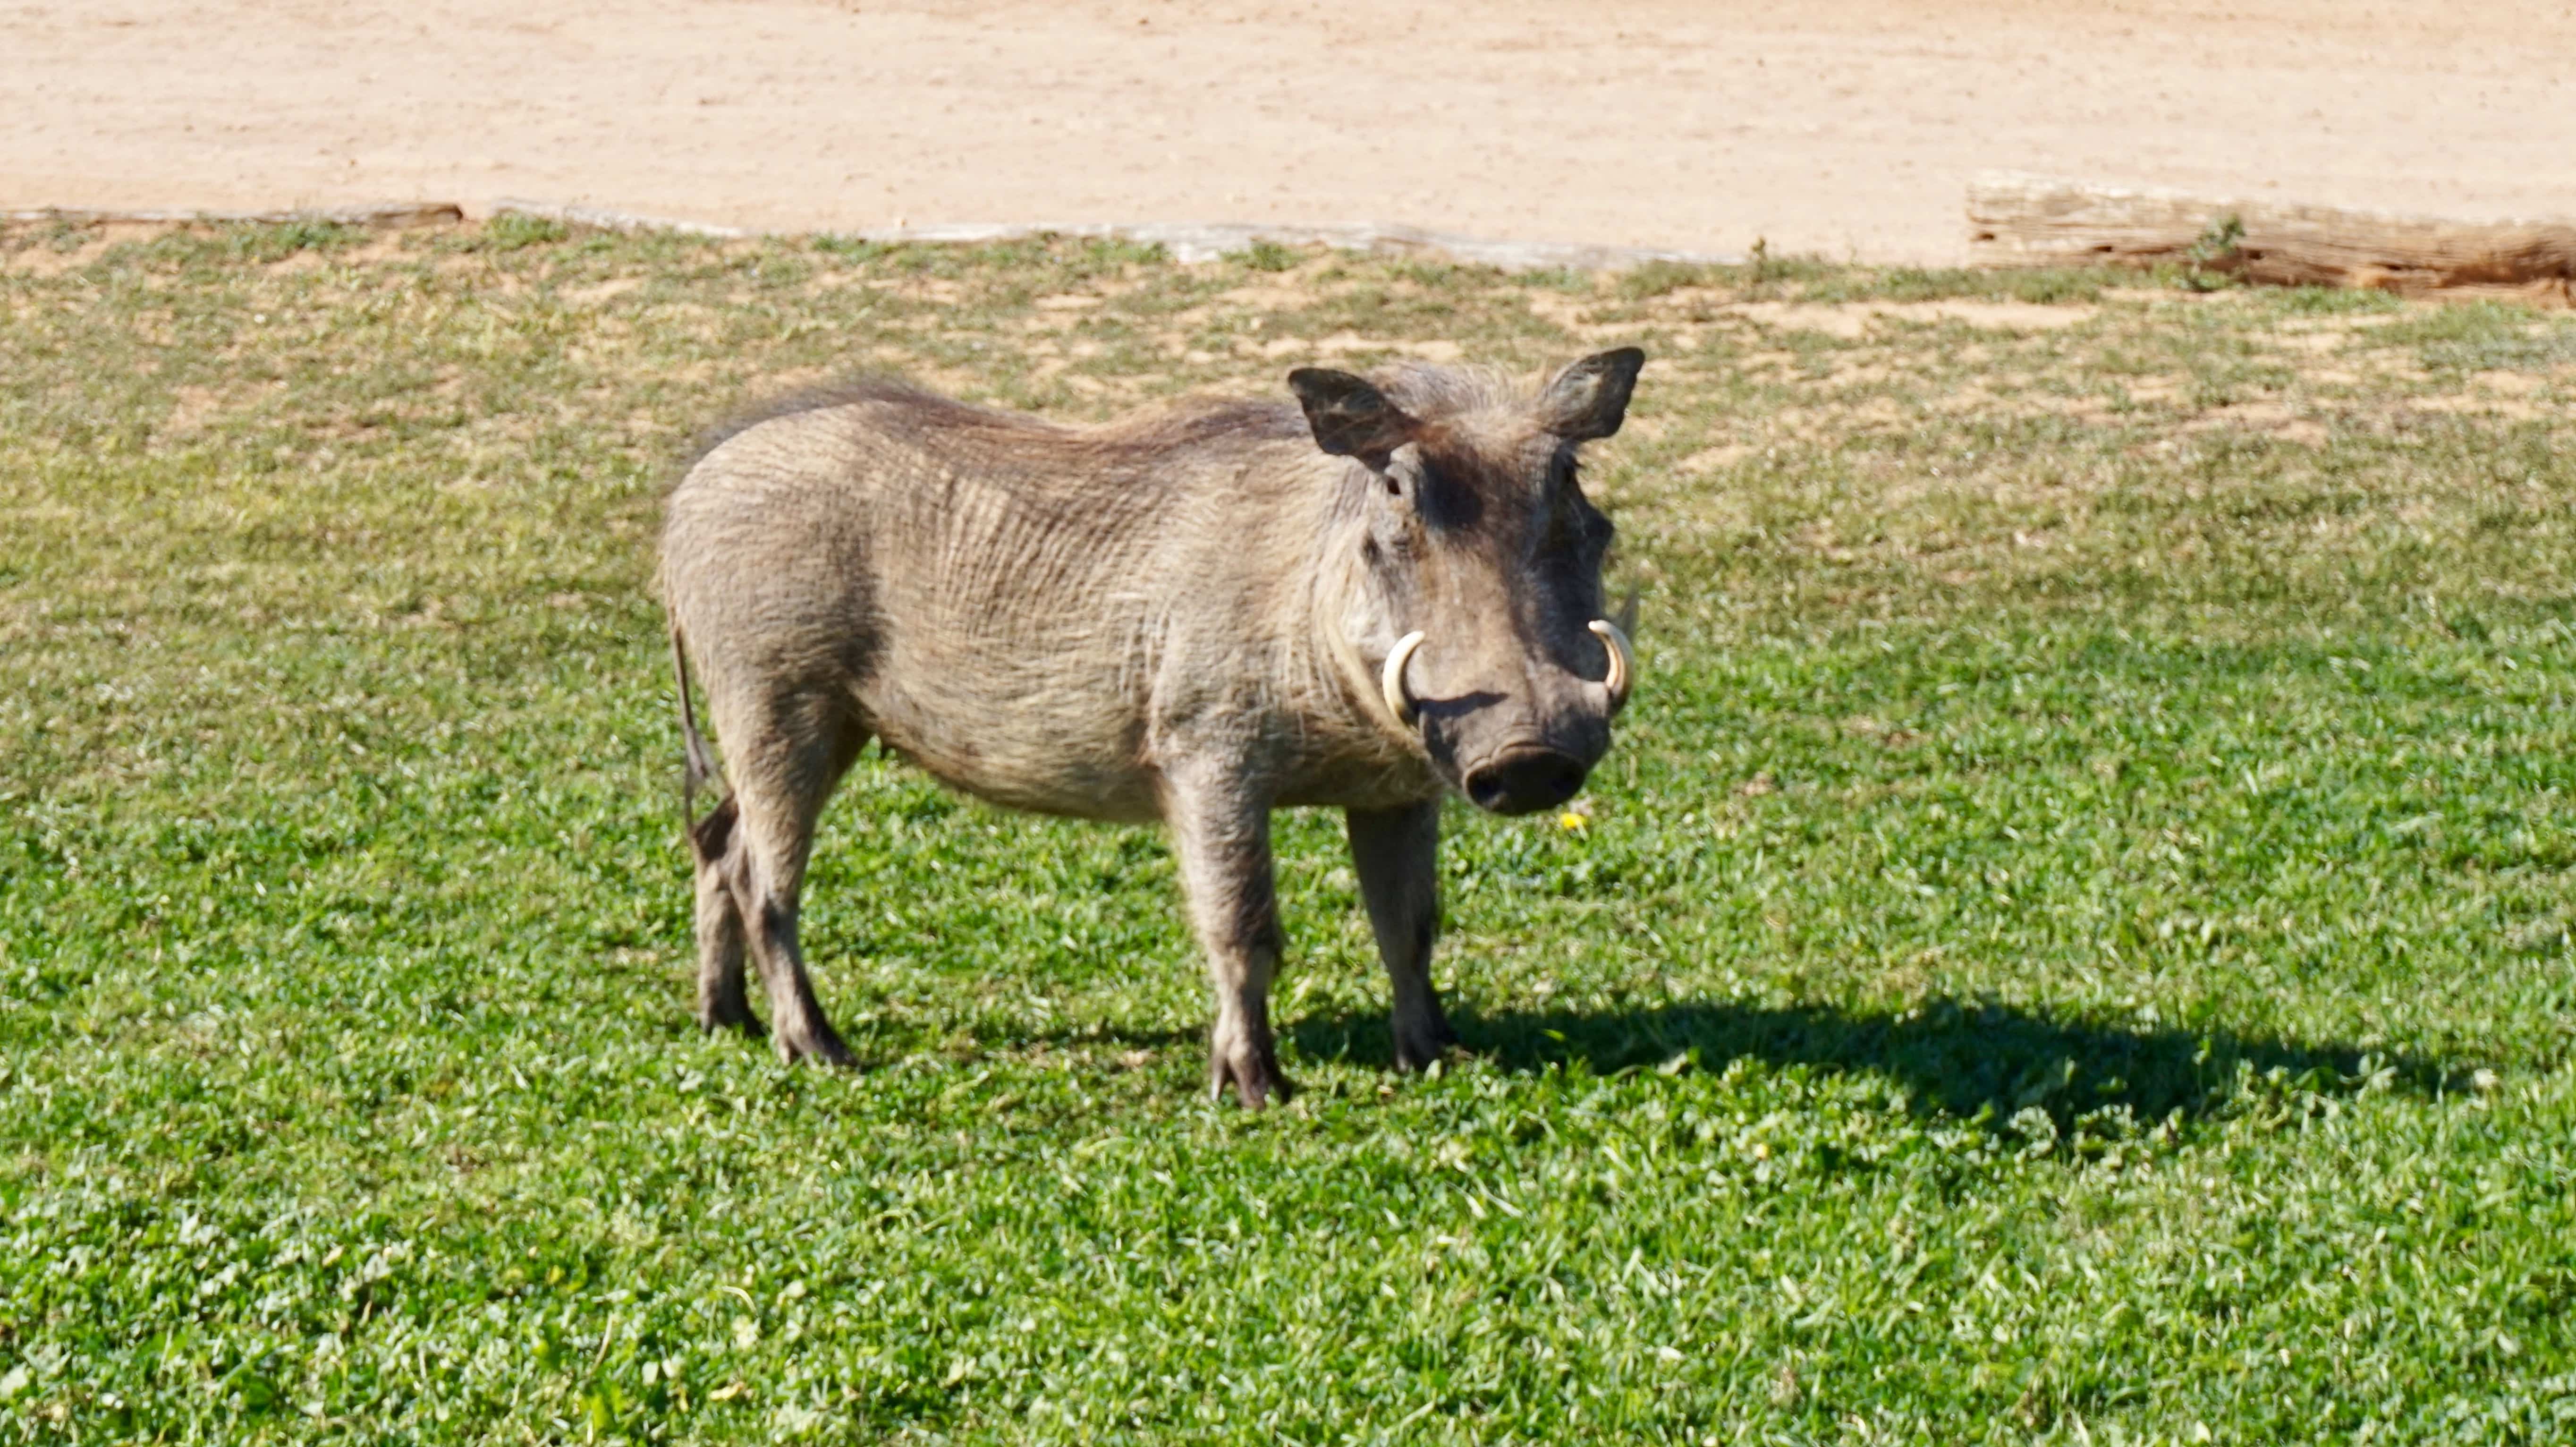 Warthog spotted on a self-drive safari at Addo Elephant National Park